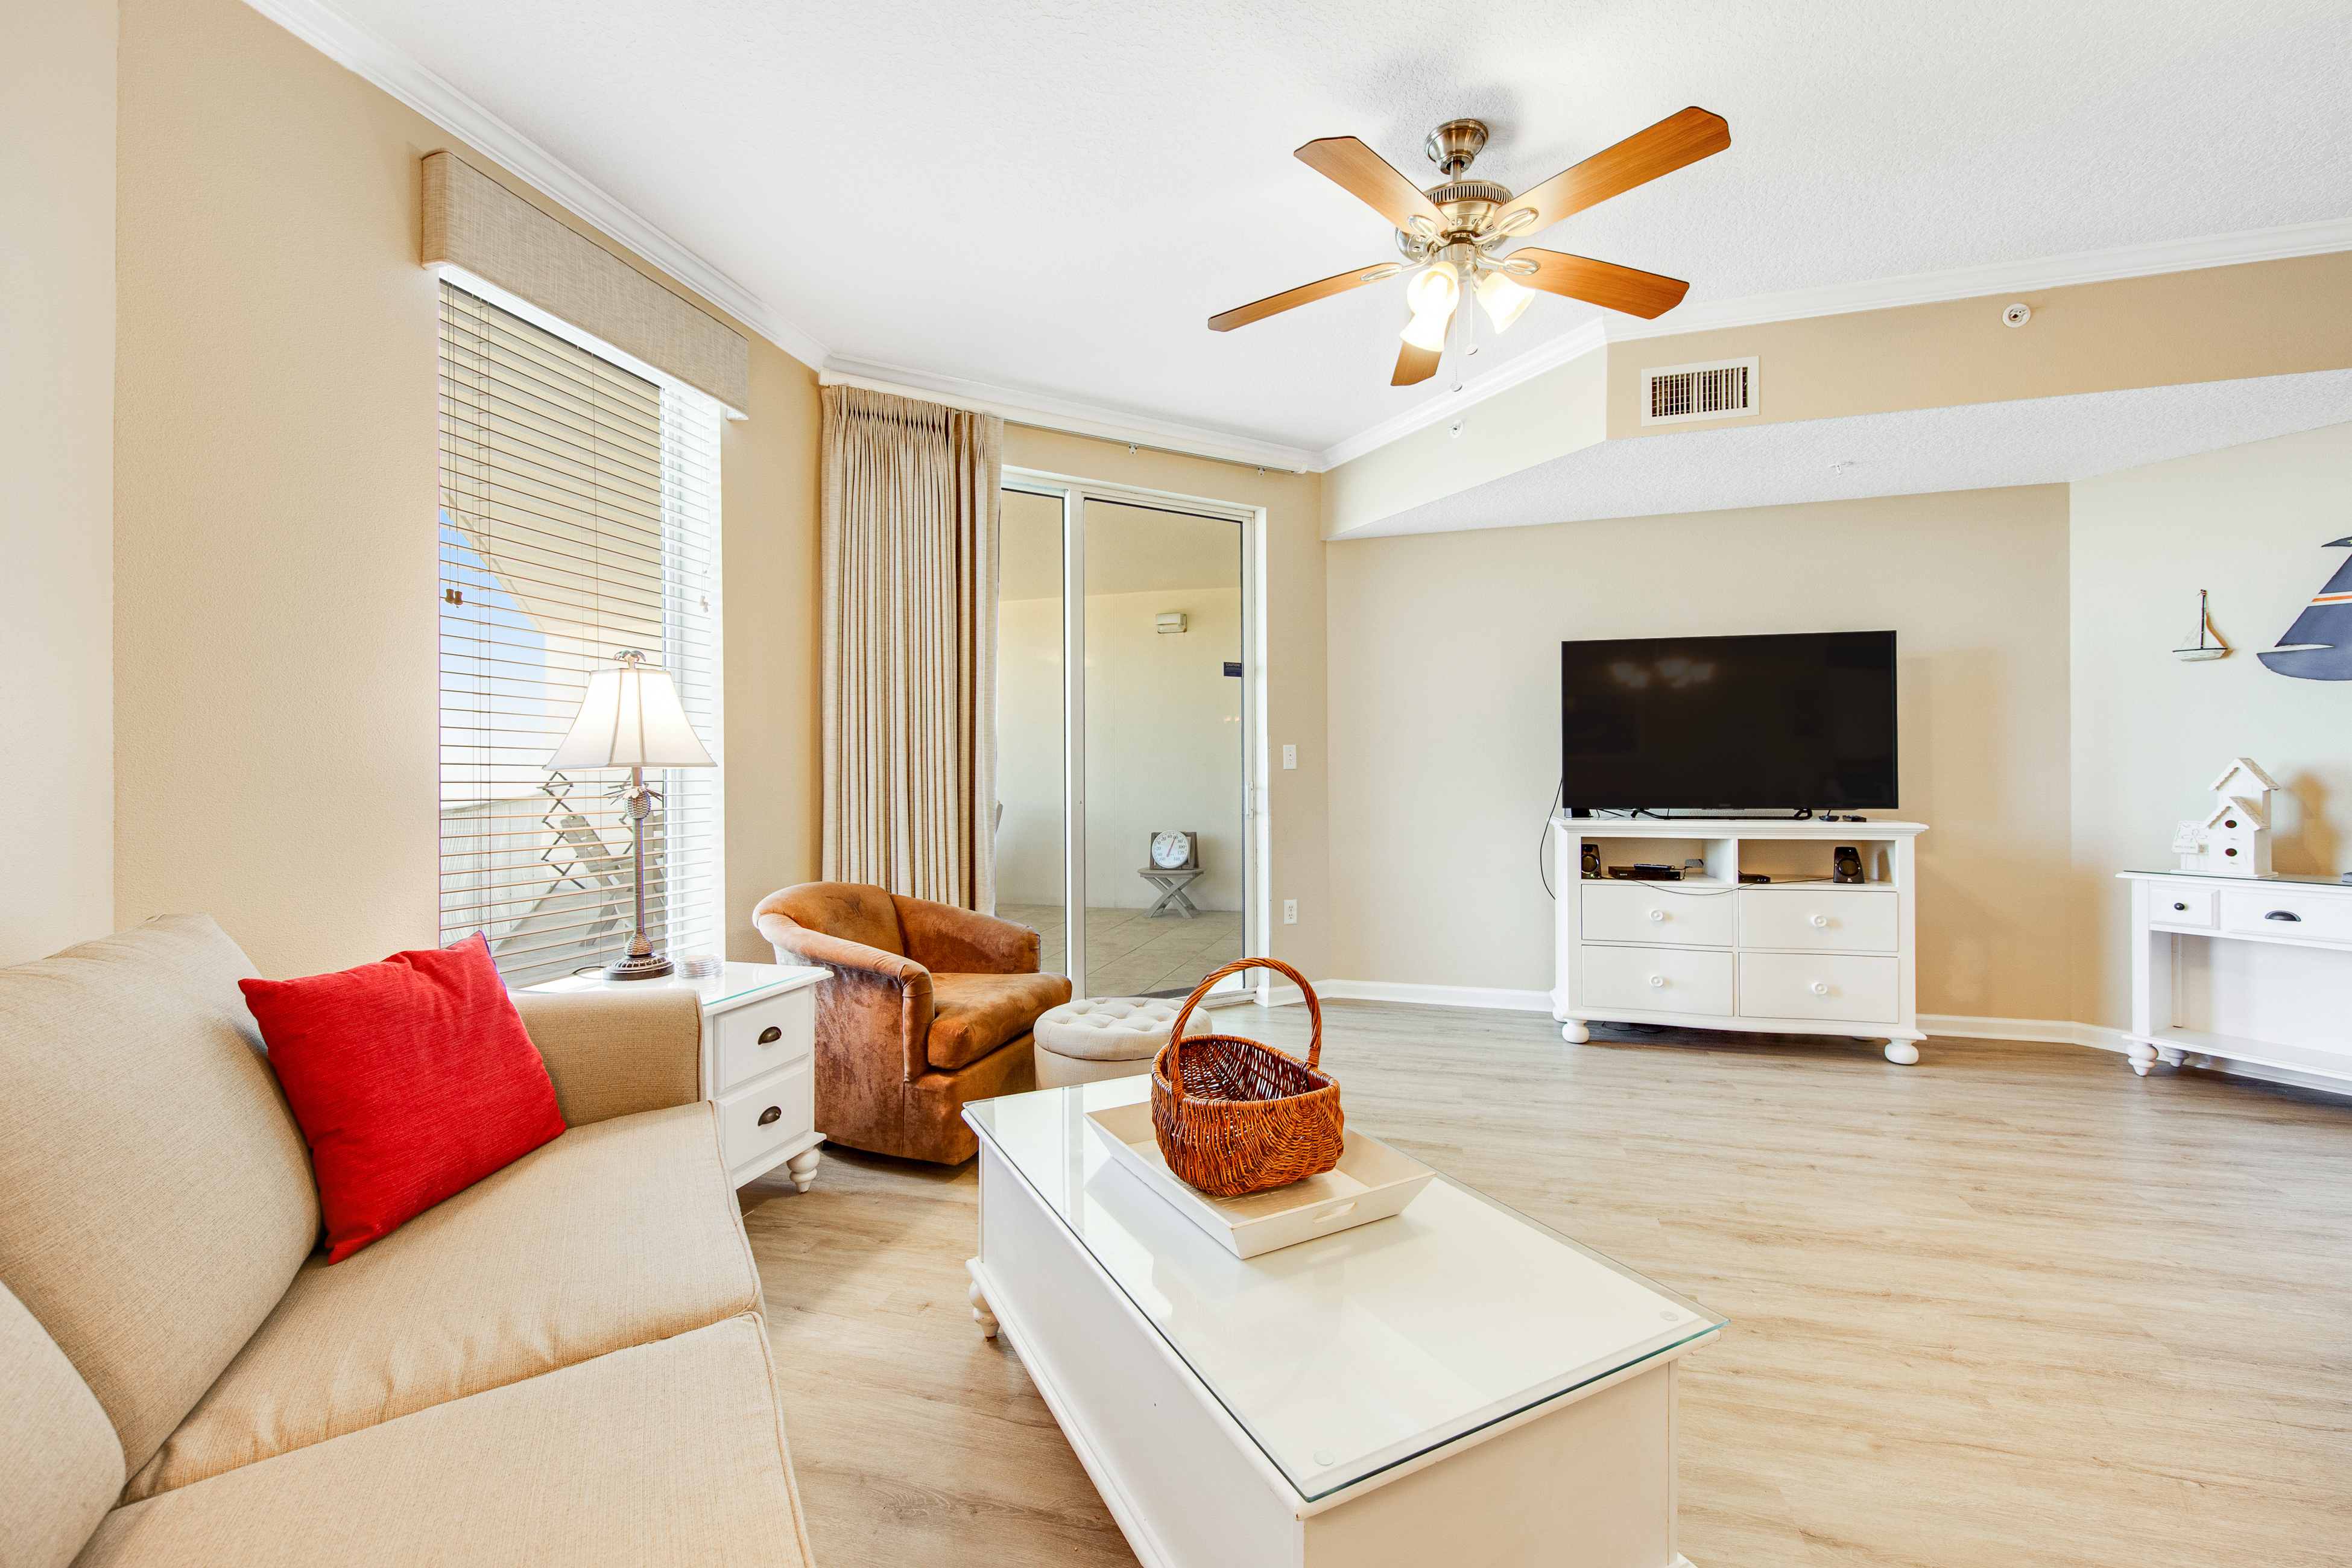 Dunes of Seagrove A205 Condo rental in Dunes of Seagrove in Highway 30-A Florida - #1